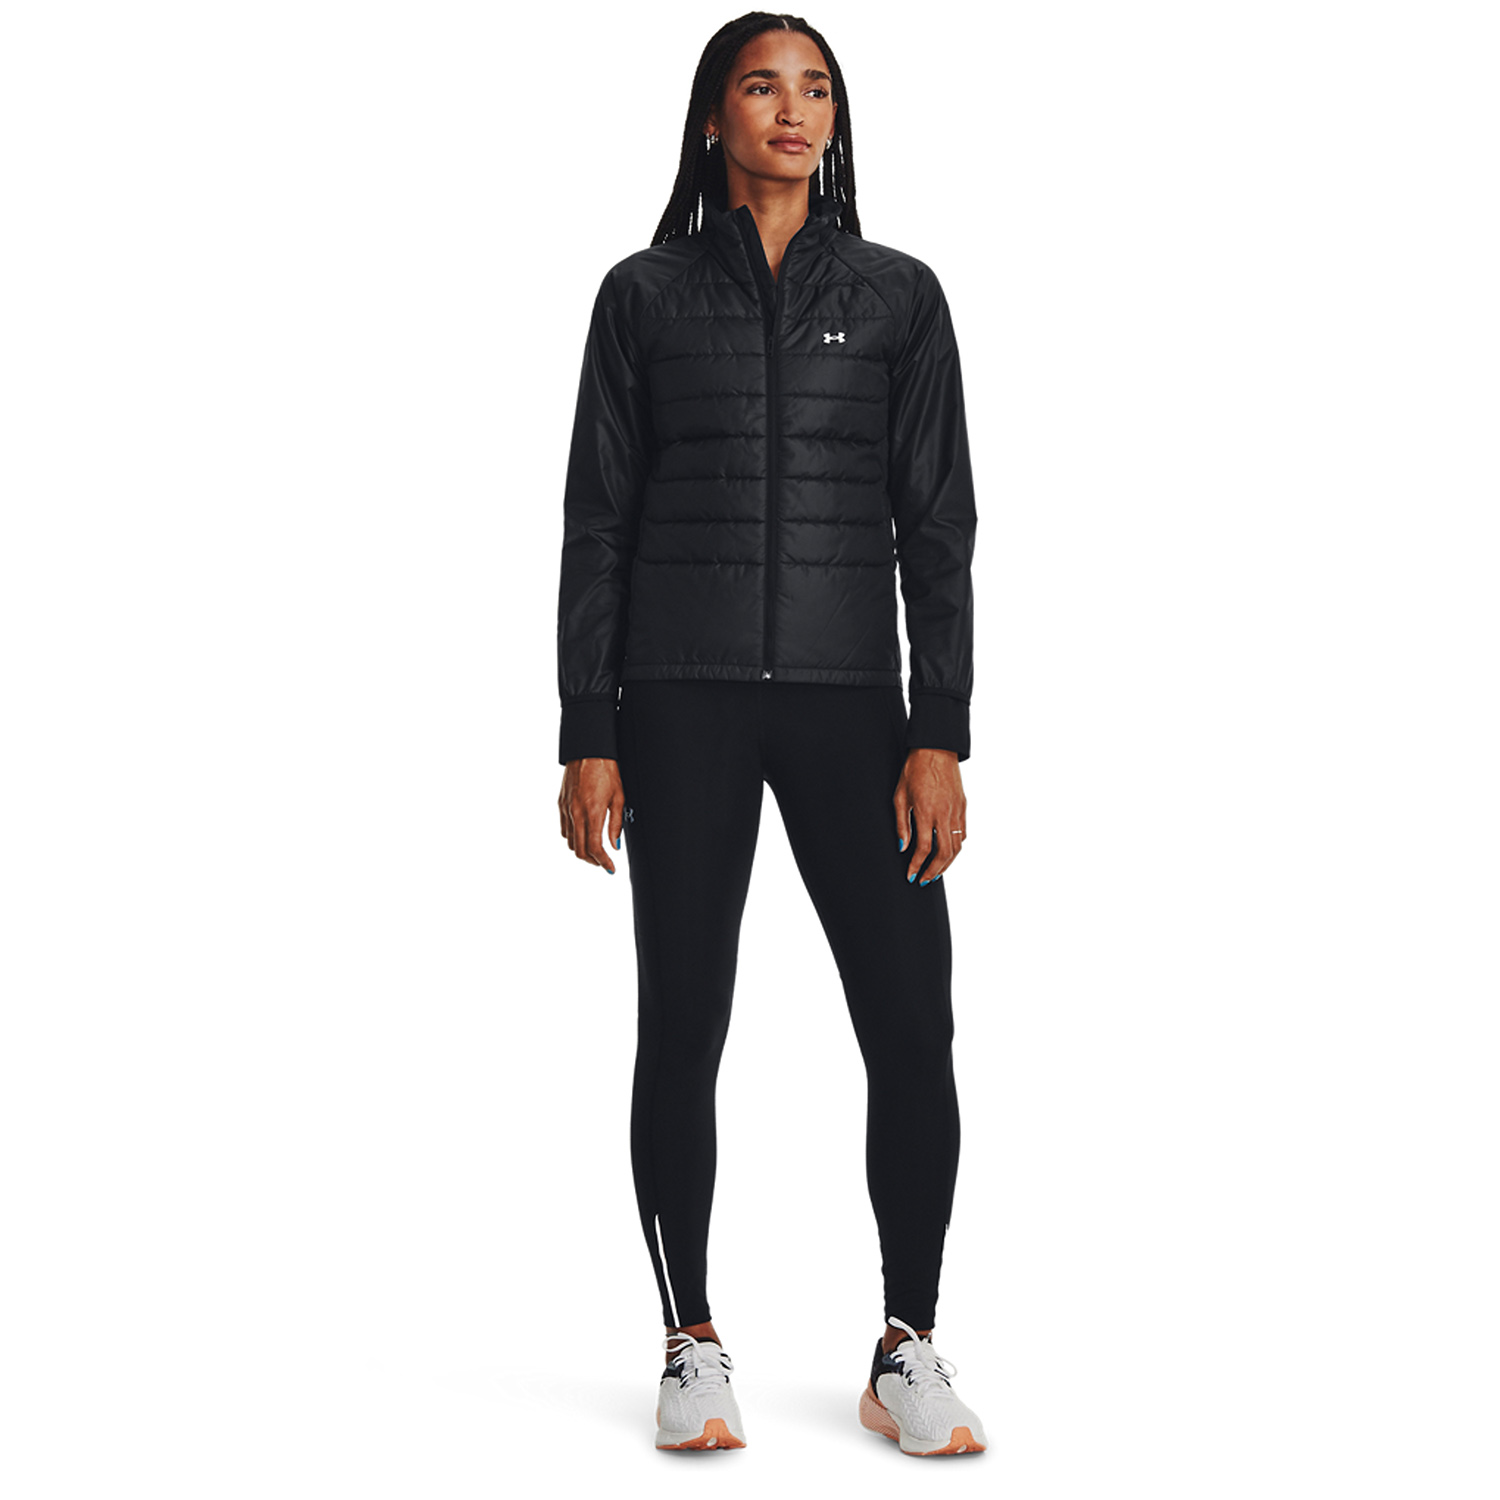 Under Armour Storm Insuled Chaqueta - Black/Reflective